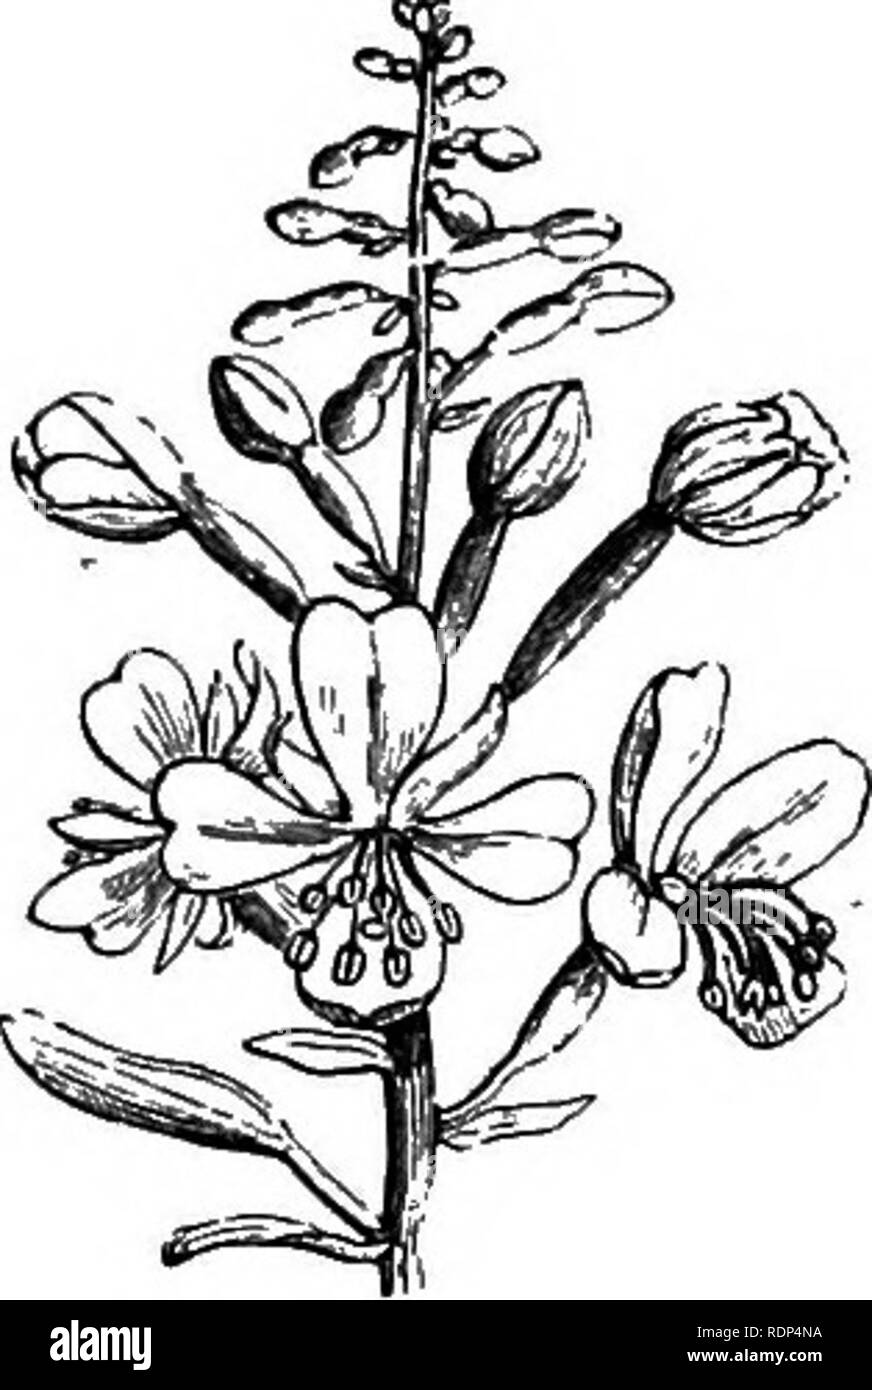 . Scientific lectures. Science; Natural history; Archaeology. i.] MODES OF CHECKING SELF-FERTILIZATION. 15 sequently incapable of fertilizing itself. In E. parvi- fiorum, on the contrary, the stamens and pistil come to maturity at the same time.. Fig. 13.—Epilobium angustifolium. Fig. 14.—Epilobium parviflorum. , Let us take another case—that of certain Geraniums. In G. pratense all the stamens open, shed their pollen, and wither away before the pistil comes to maturity. The flower cannot therefore fertilize itself, and depends entirely on the visits of insects for the transference of the poll Stock Photo